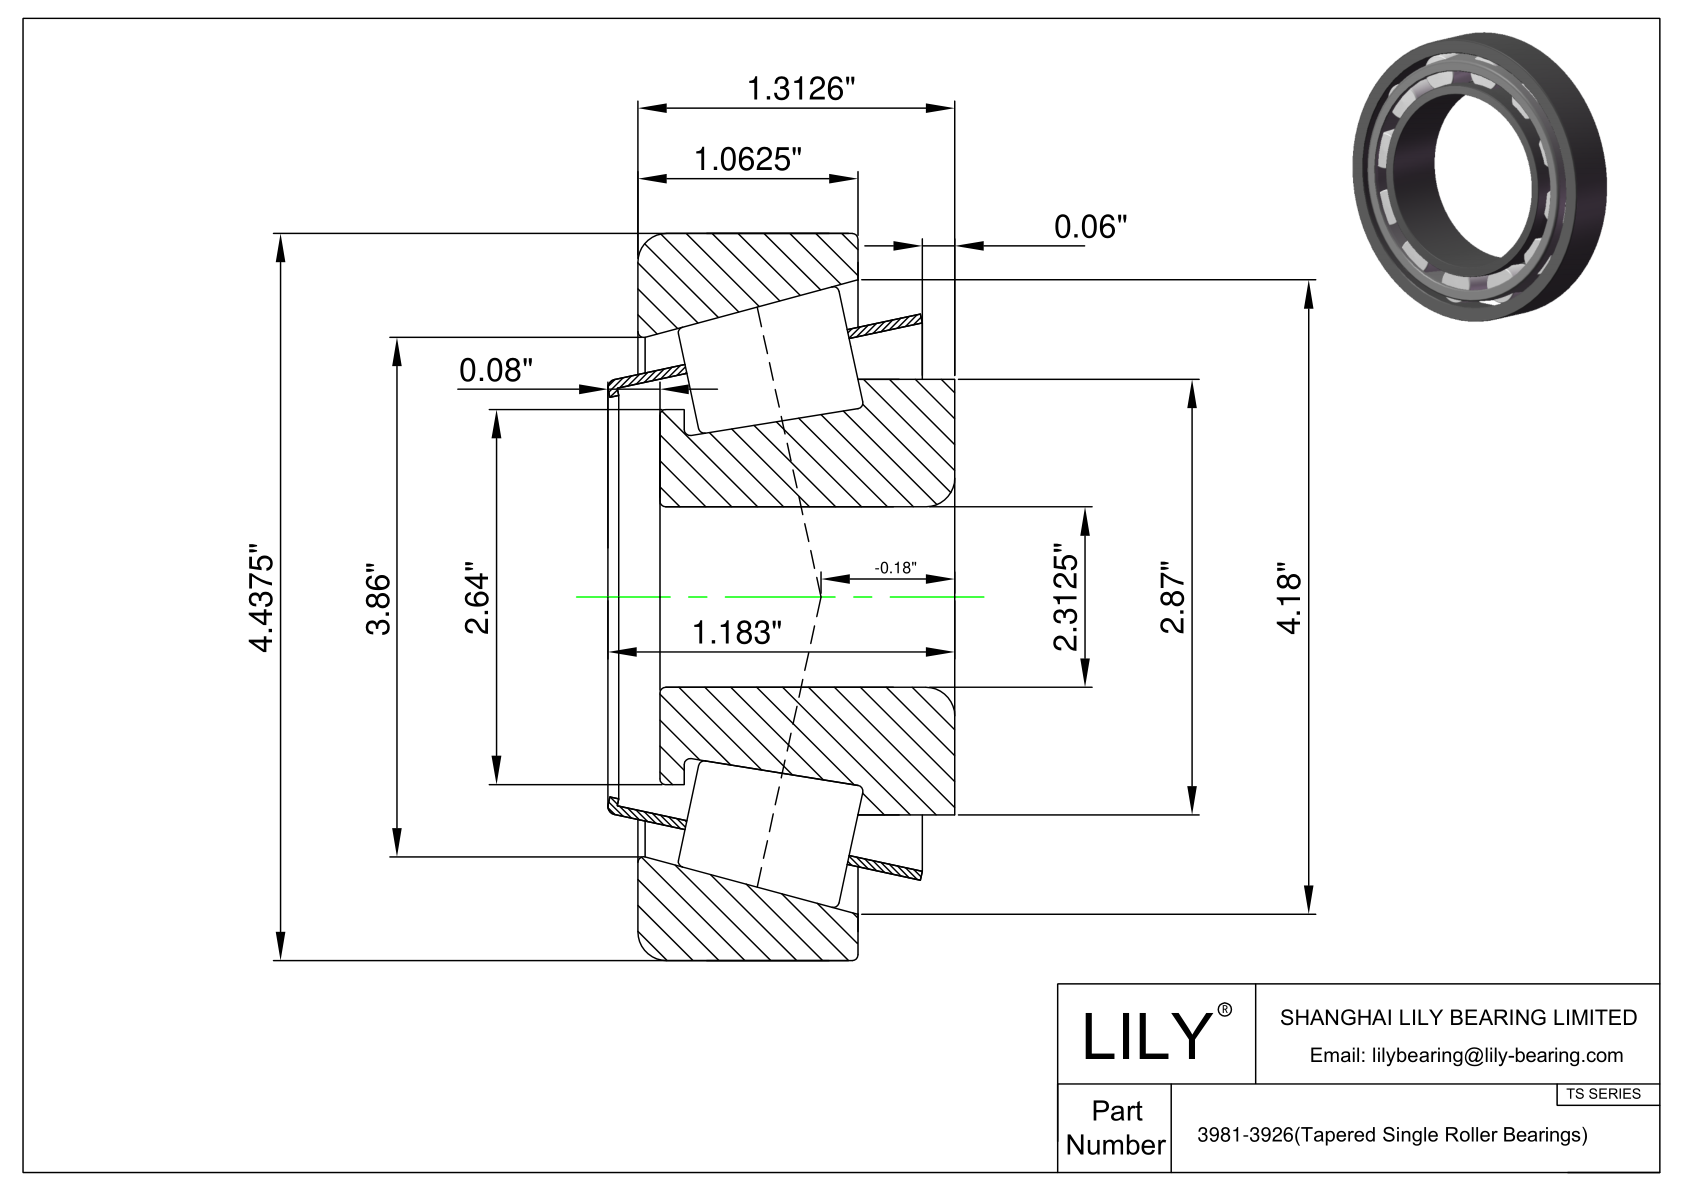 3981-3926 TS (Tapered Single Roller Bearings) (Imperial) cad drawing